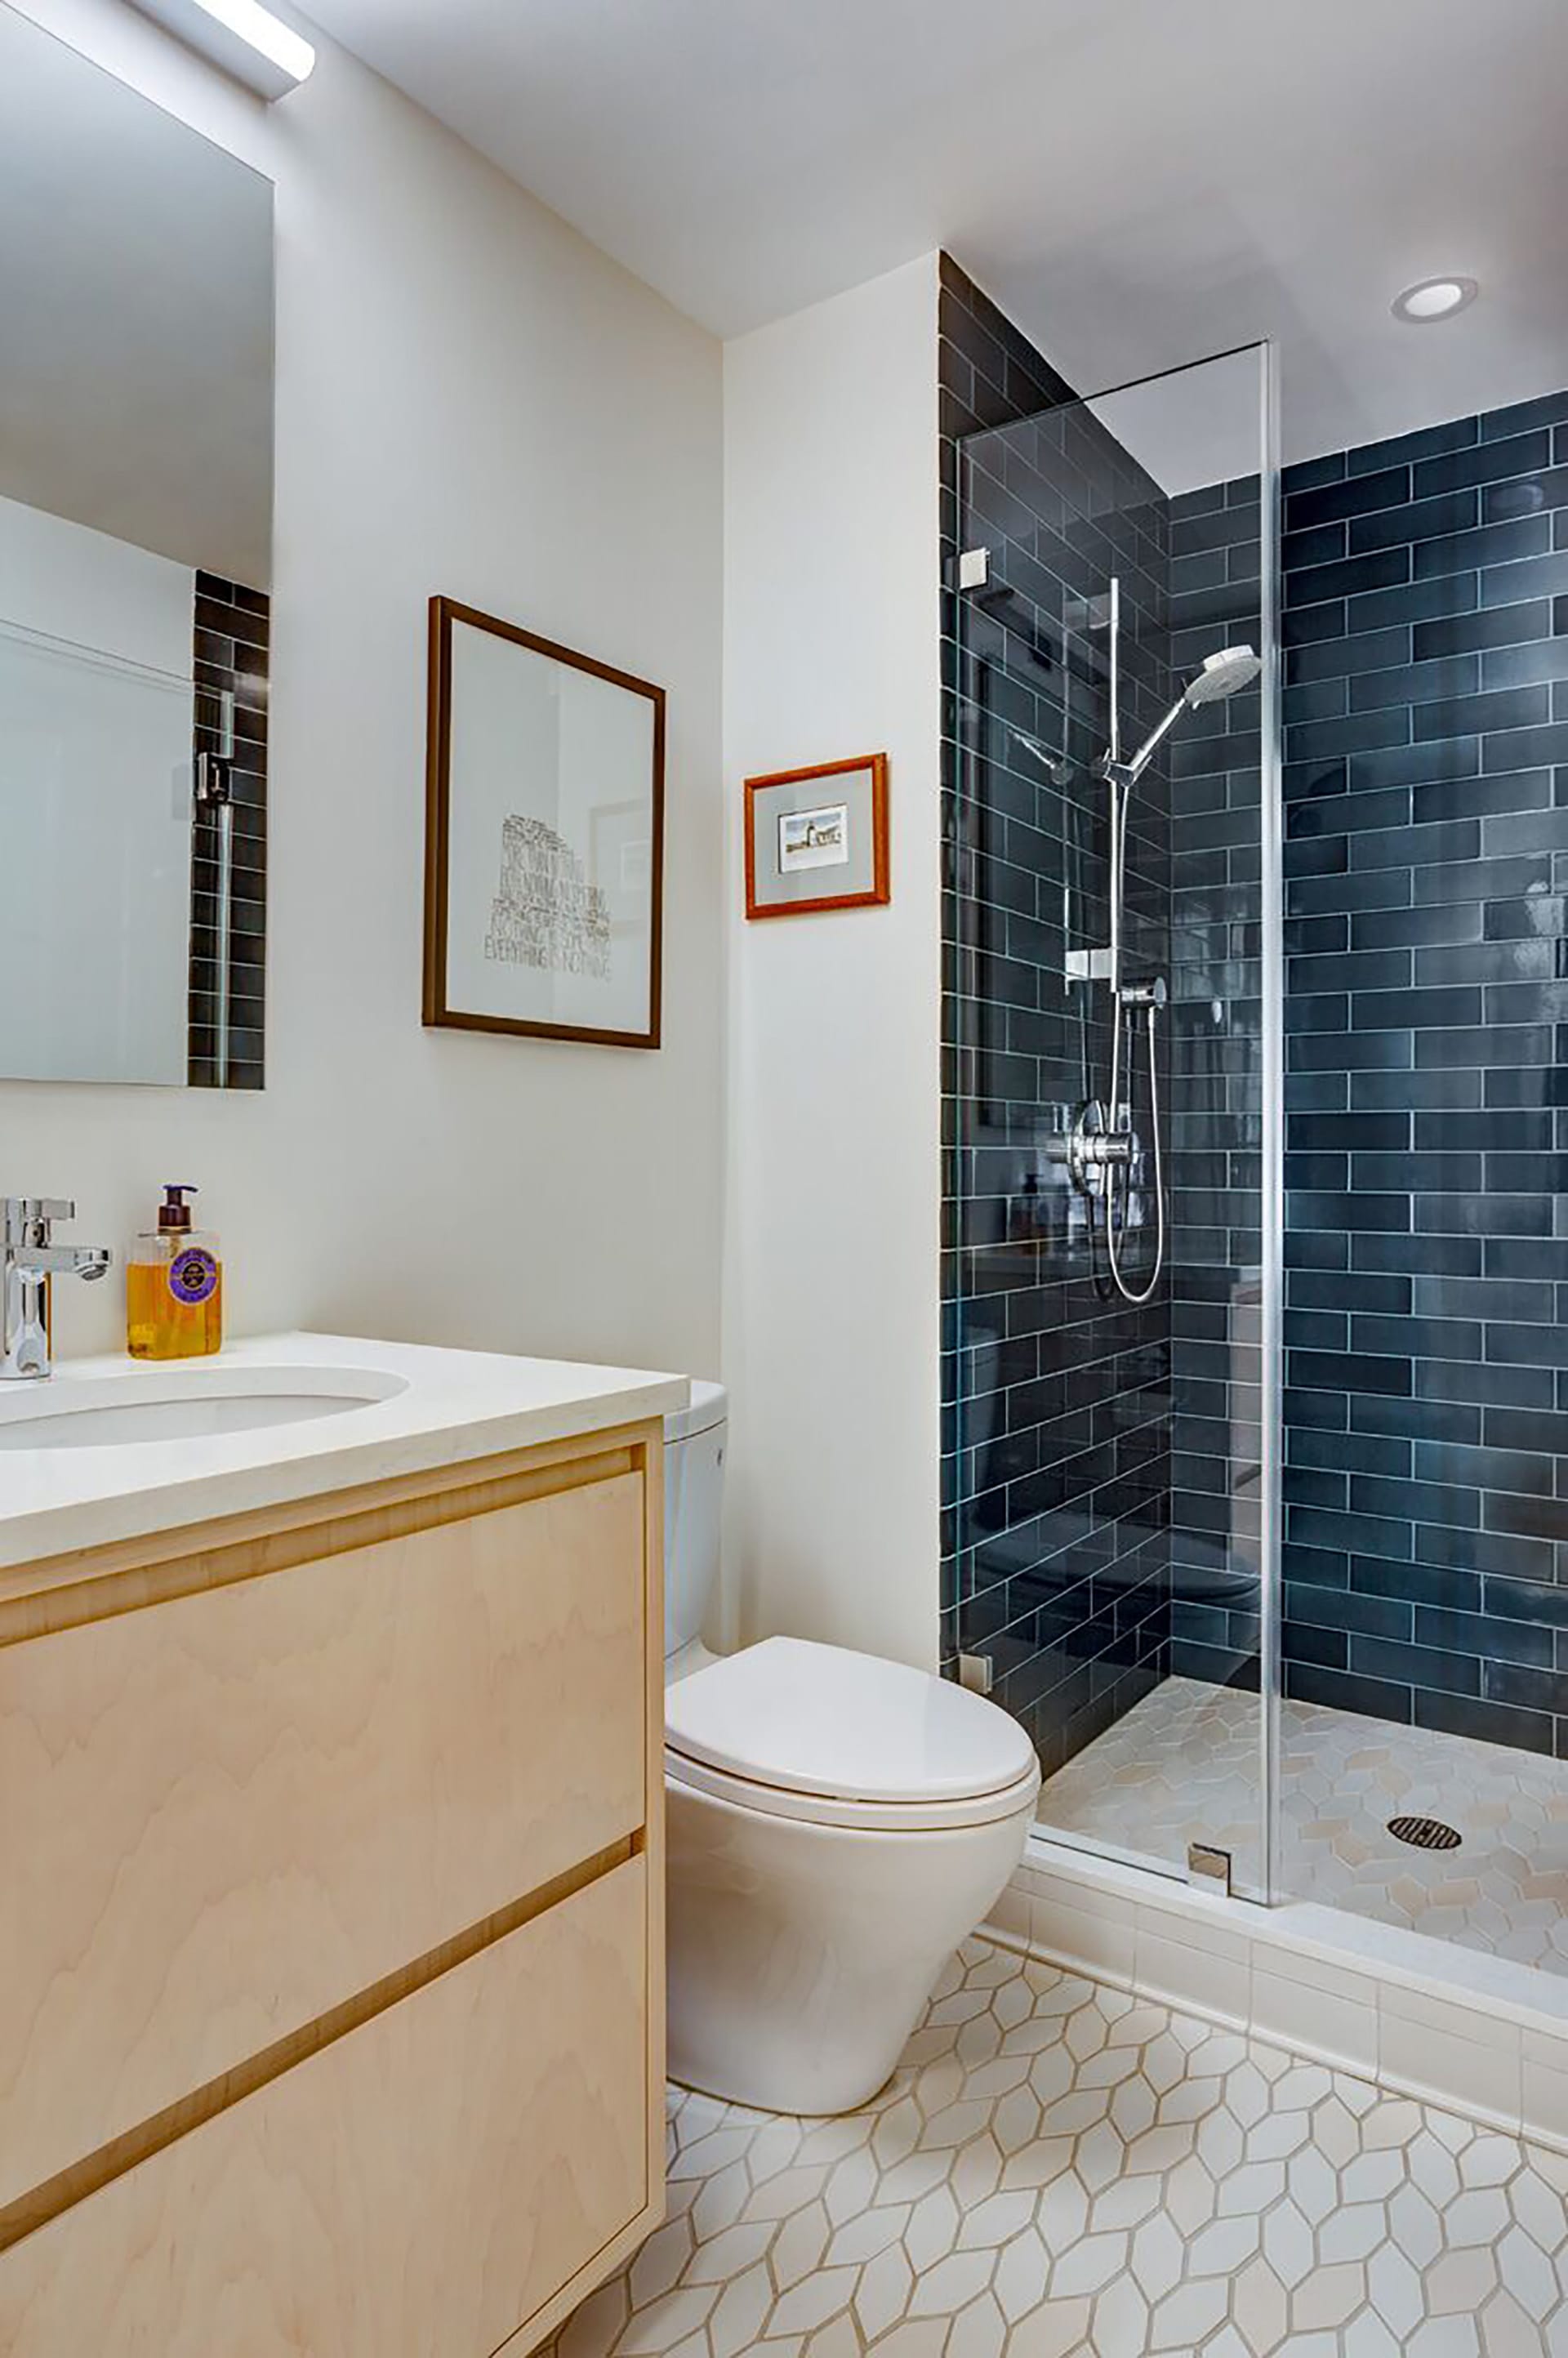 Brooklyn heights bathroom with dark teal subway tiles in the shower stall, white floor tiles, and a light wood vanity.